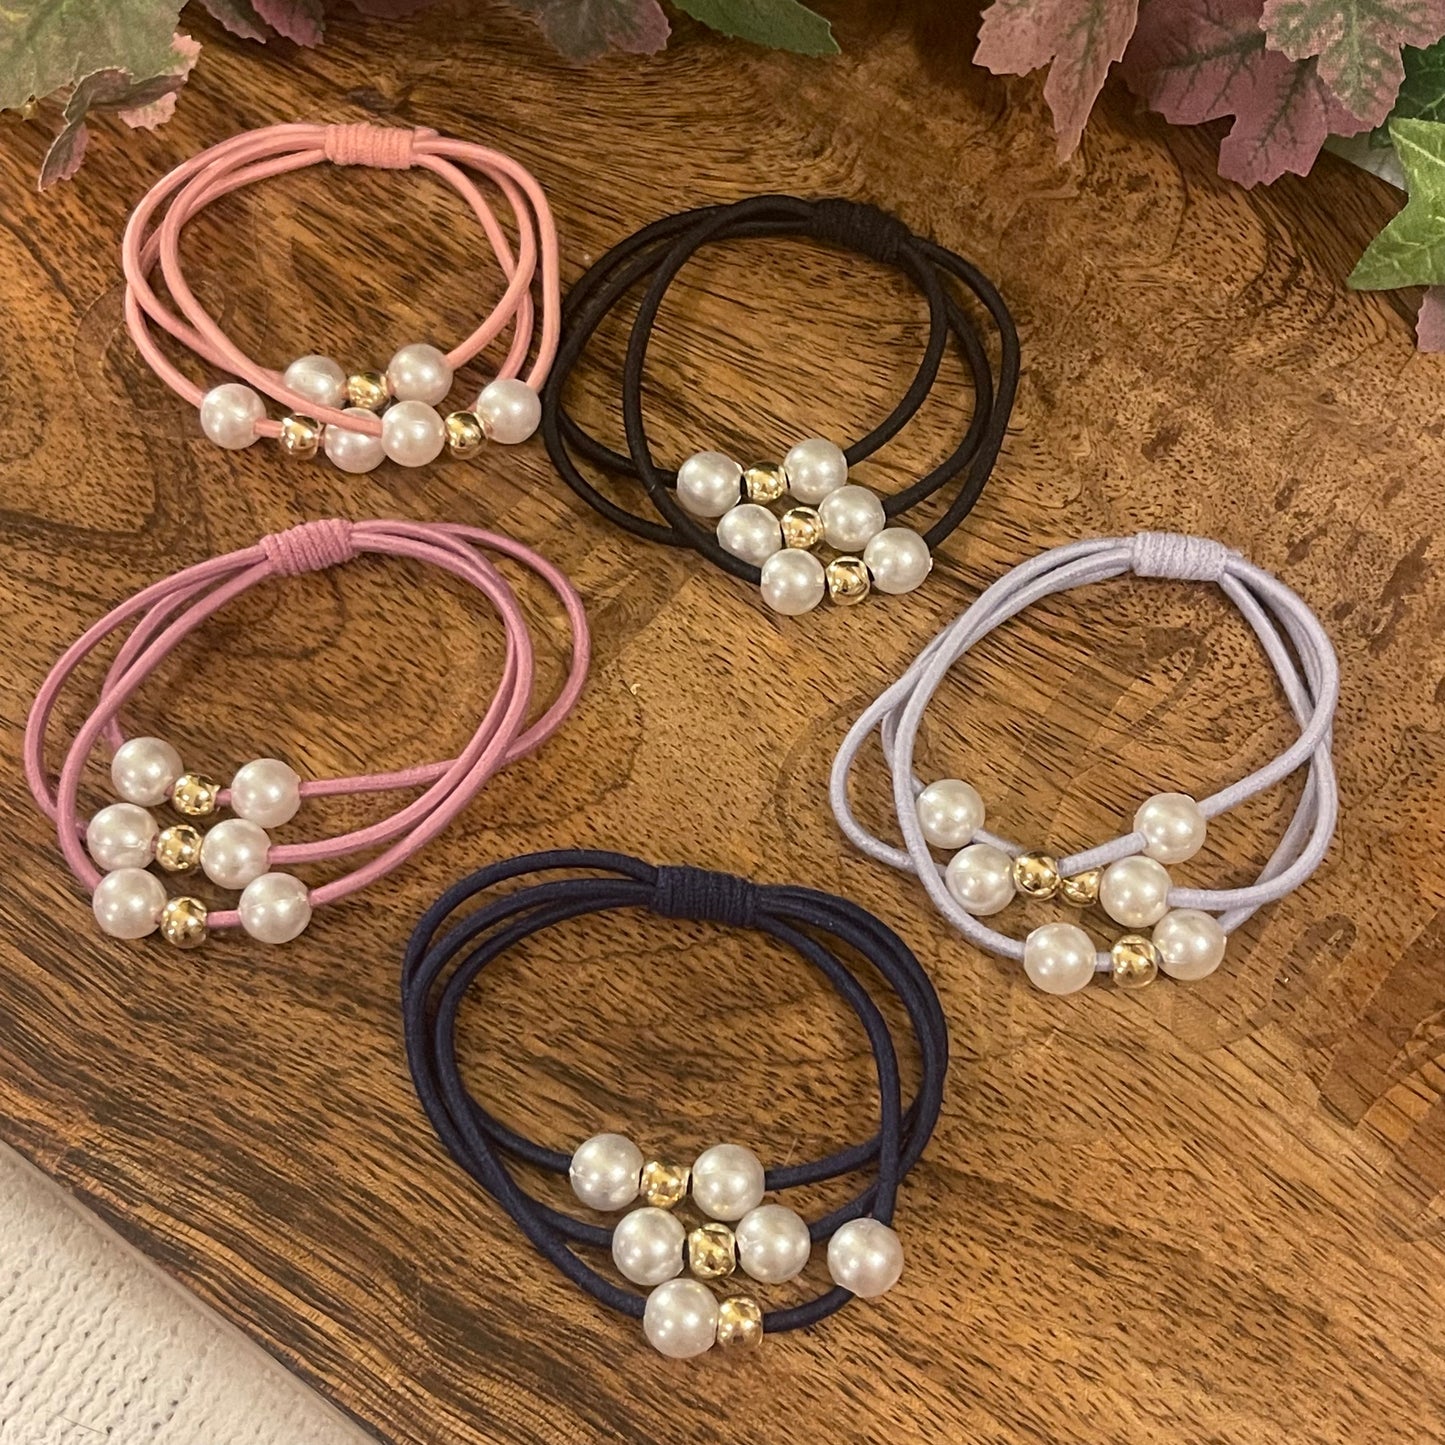 Boxed Ponytail Holder With Pearl Accent Set